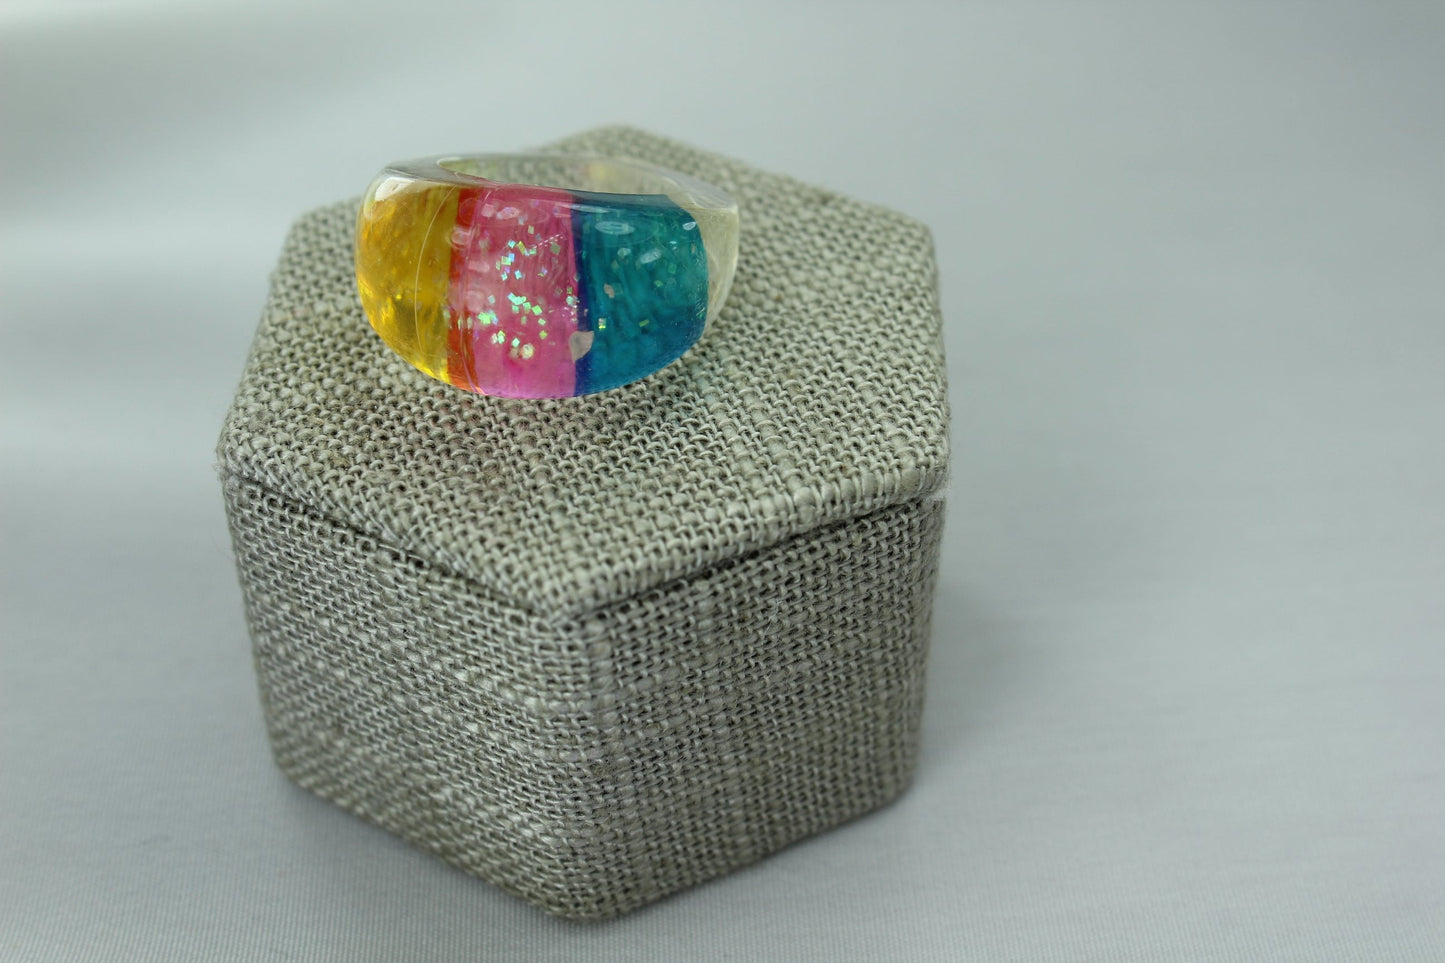 Vintage Lucite Ring Rainbow Dome with Sparkles Clear Blue Yellow Pink modernist